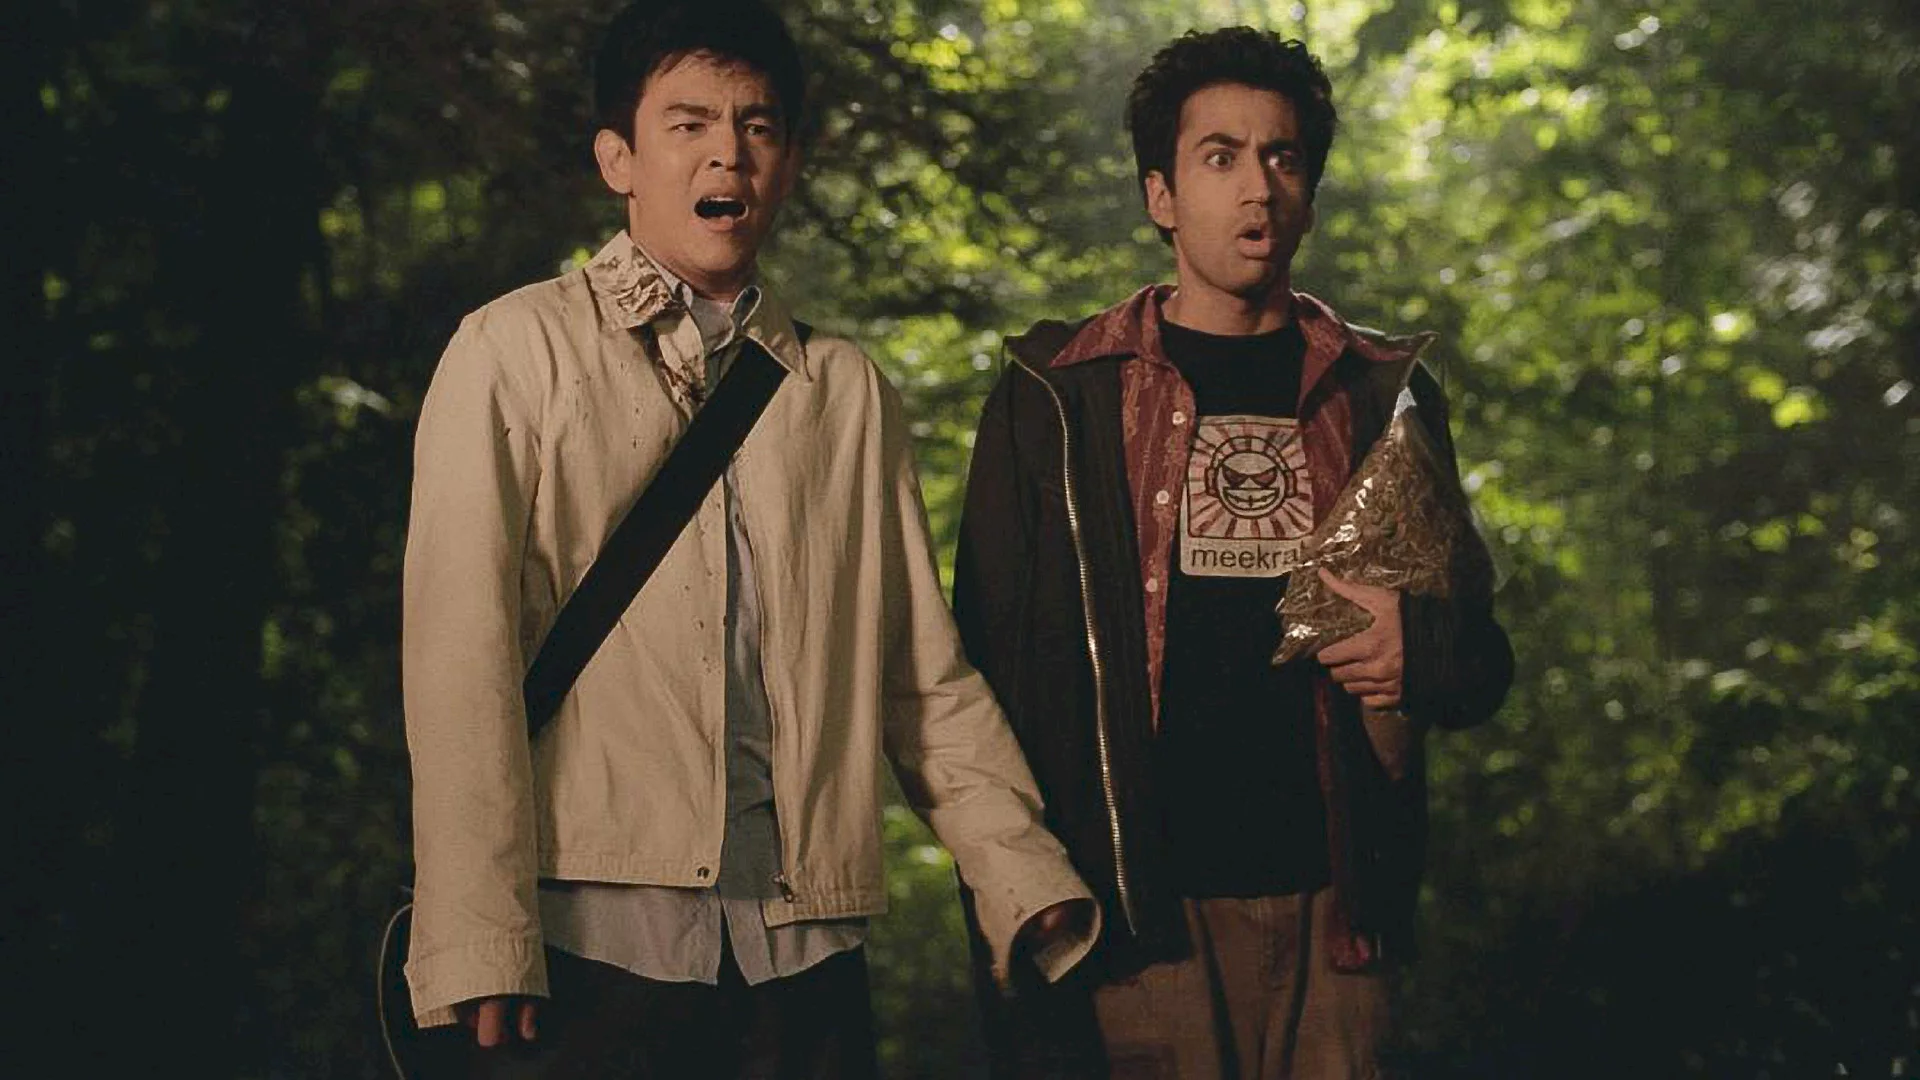 Photo 8 du film : Harold and kumar go to the white cast